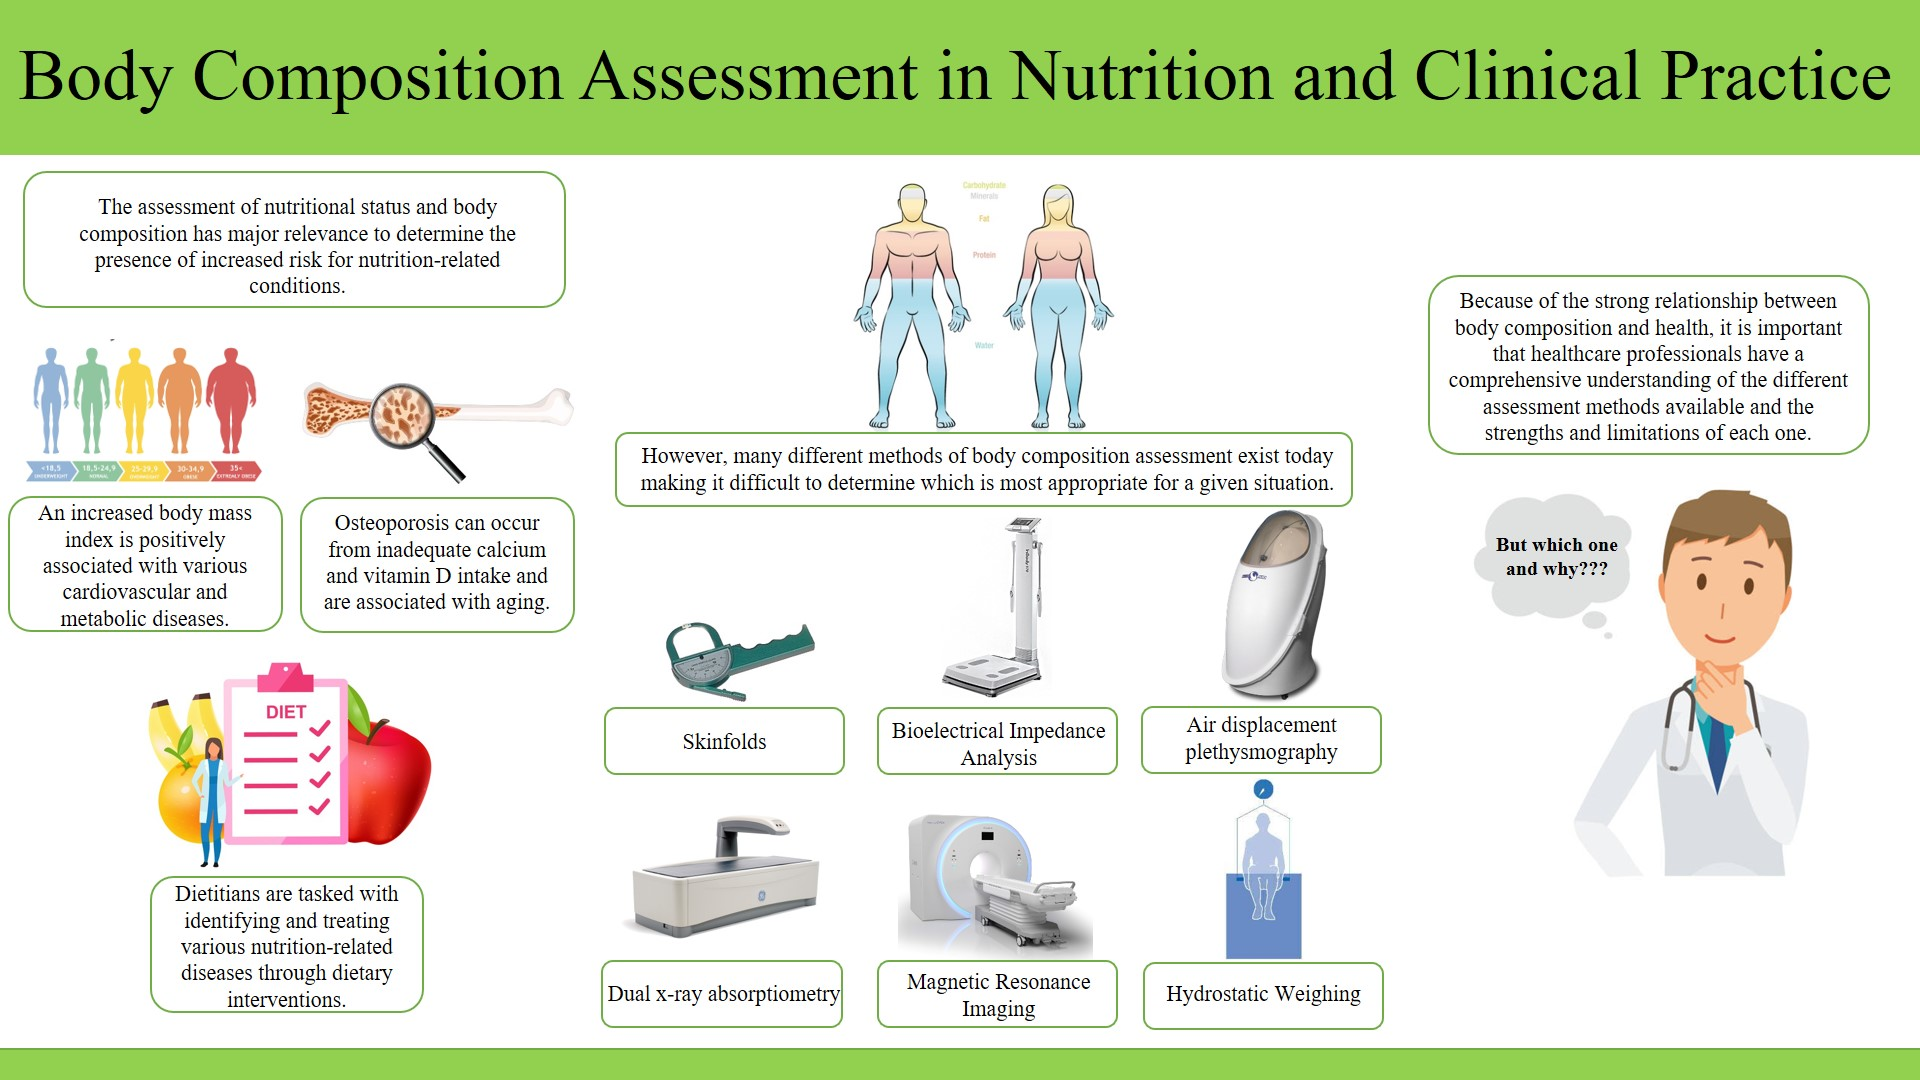 Body composition assessment